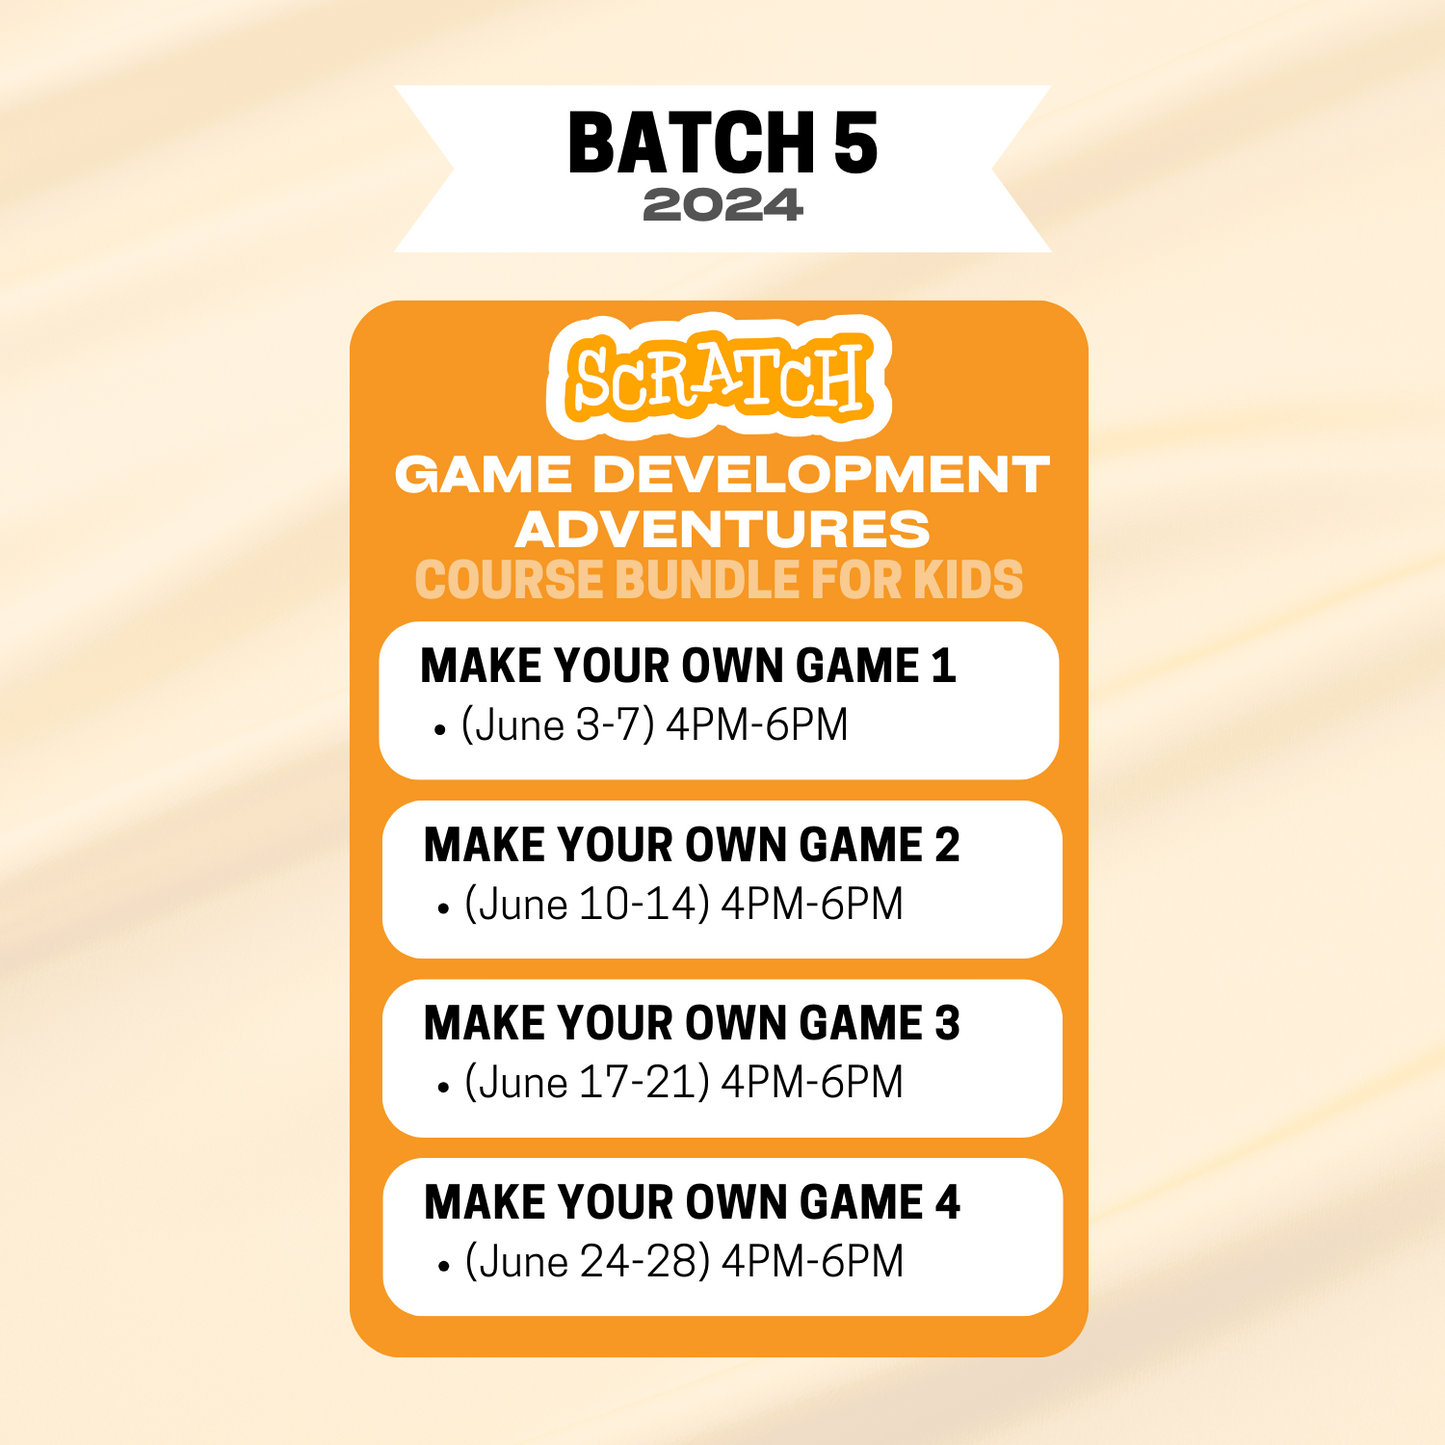 Game Dev Adventures with Scratch: Course Bundle for Kids